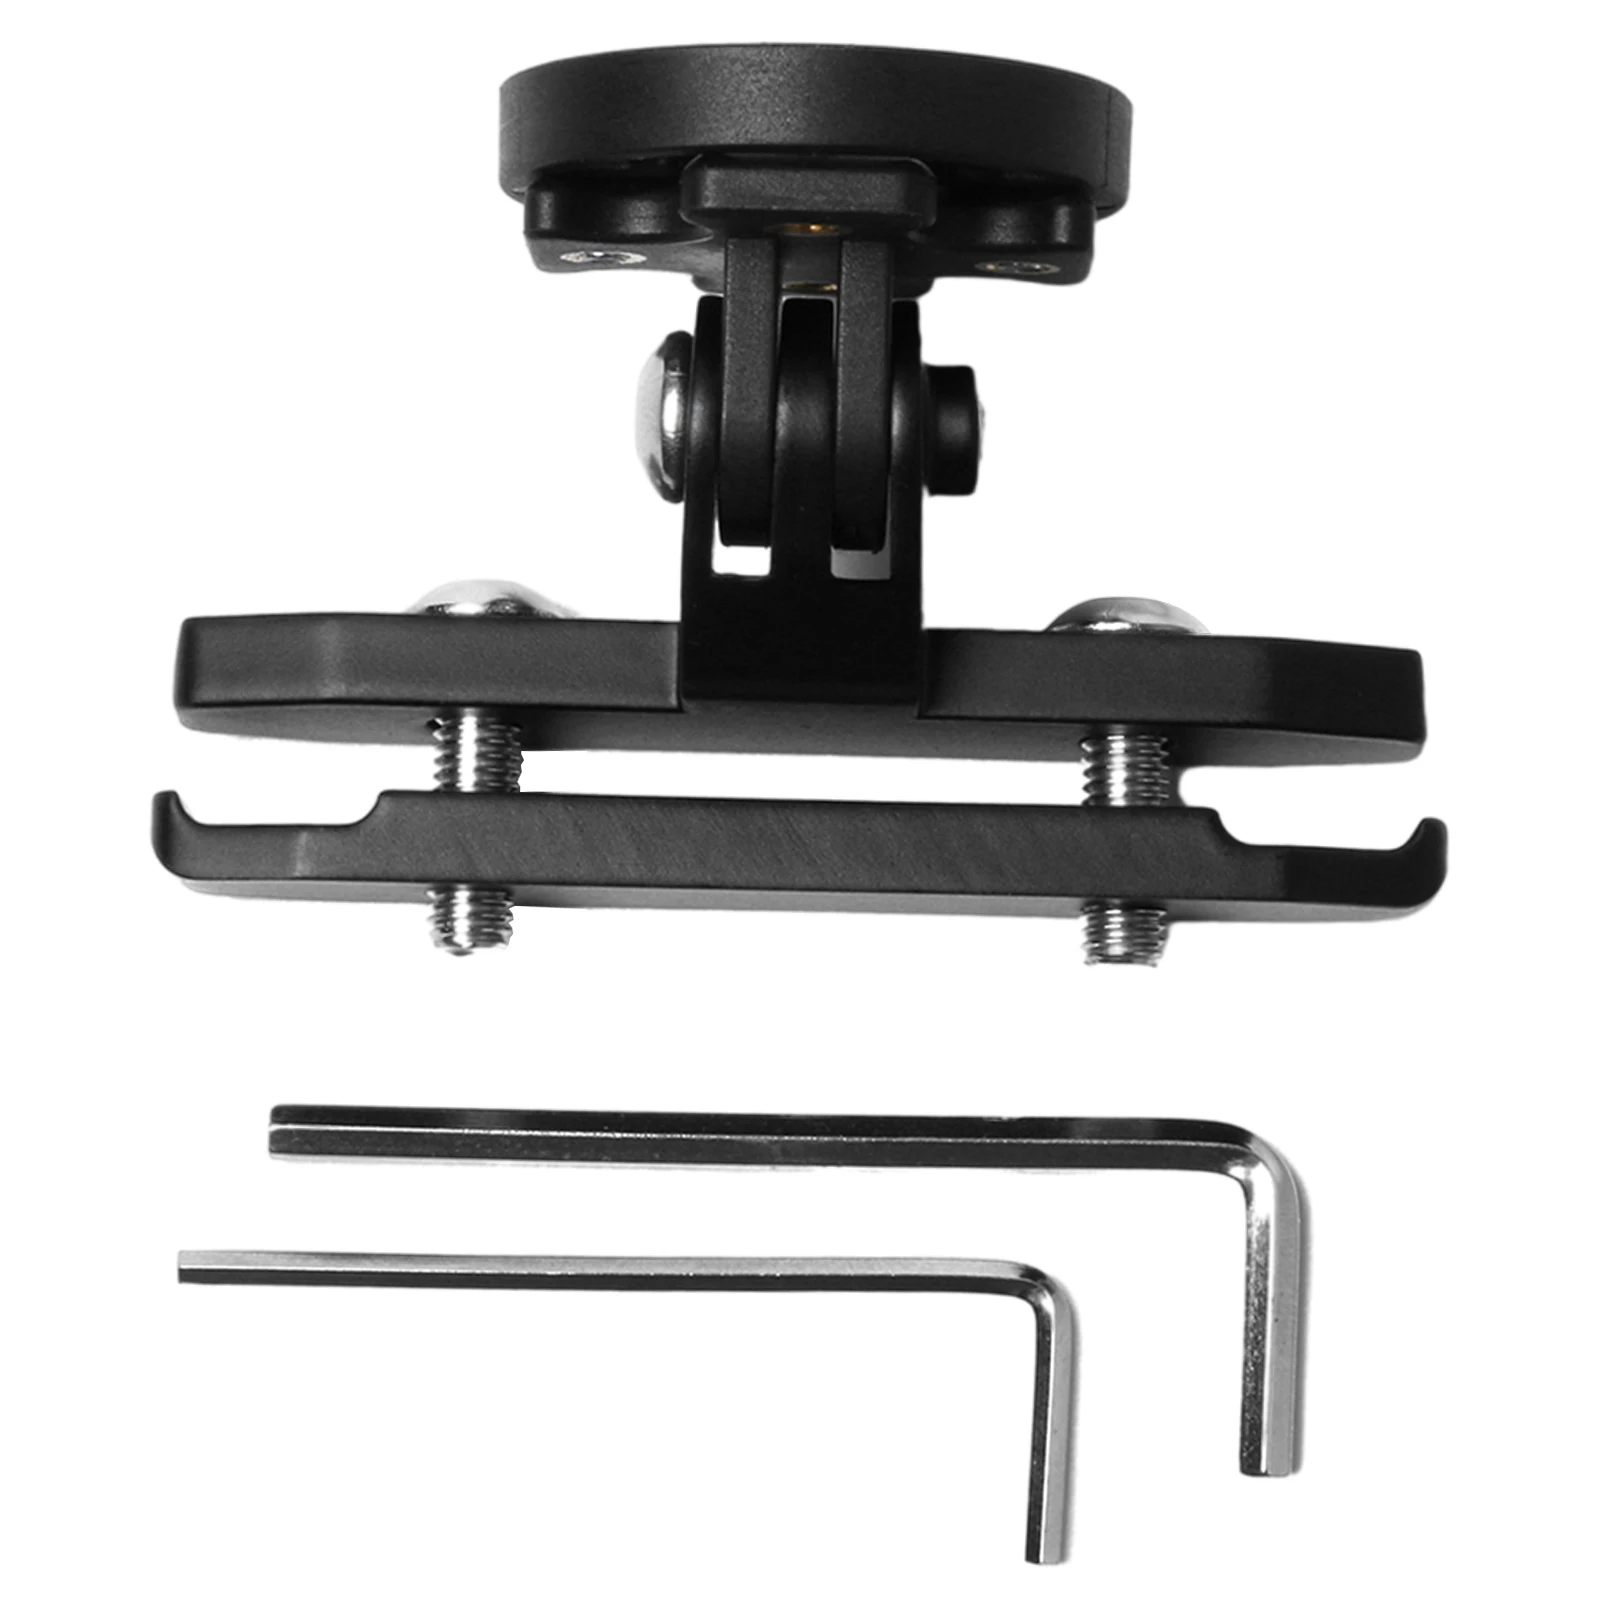 Bicycle Tail Light Saddle Seat-post Mount Holder Bracket for Garmin Varia Rearview Garmin Support Cradle Accessories